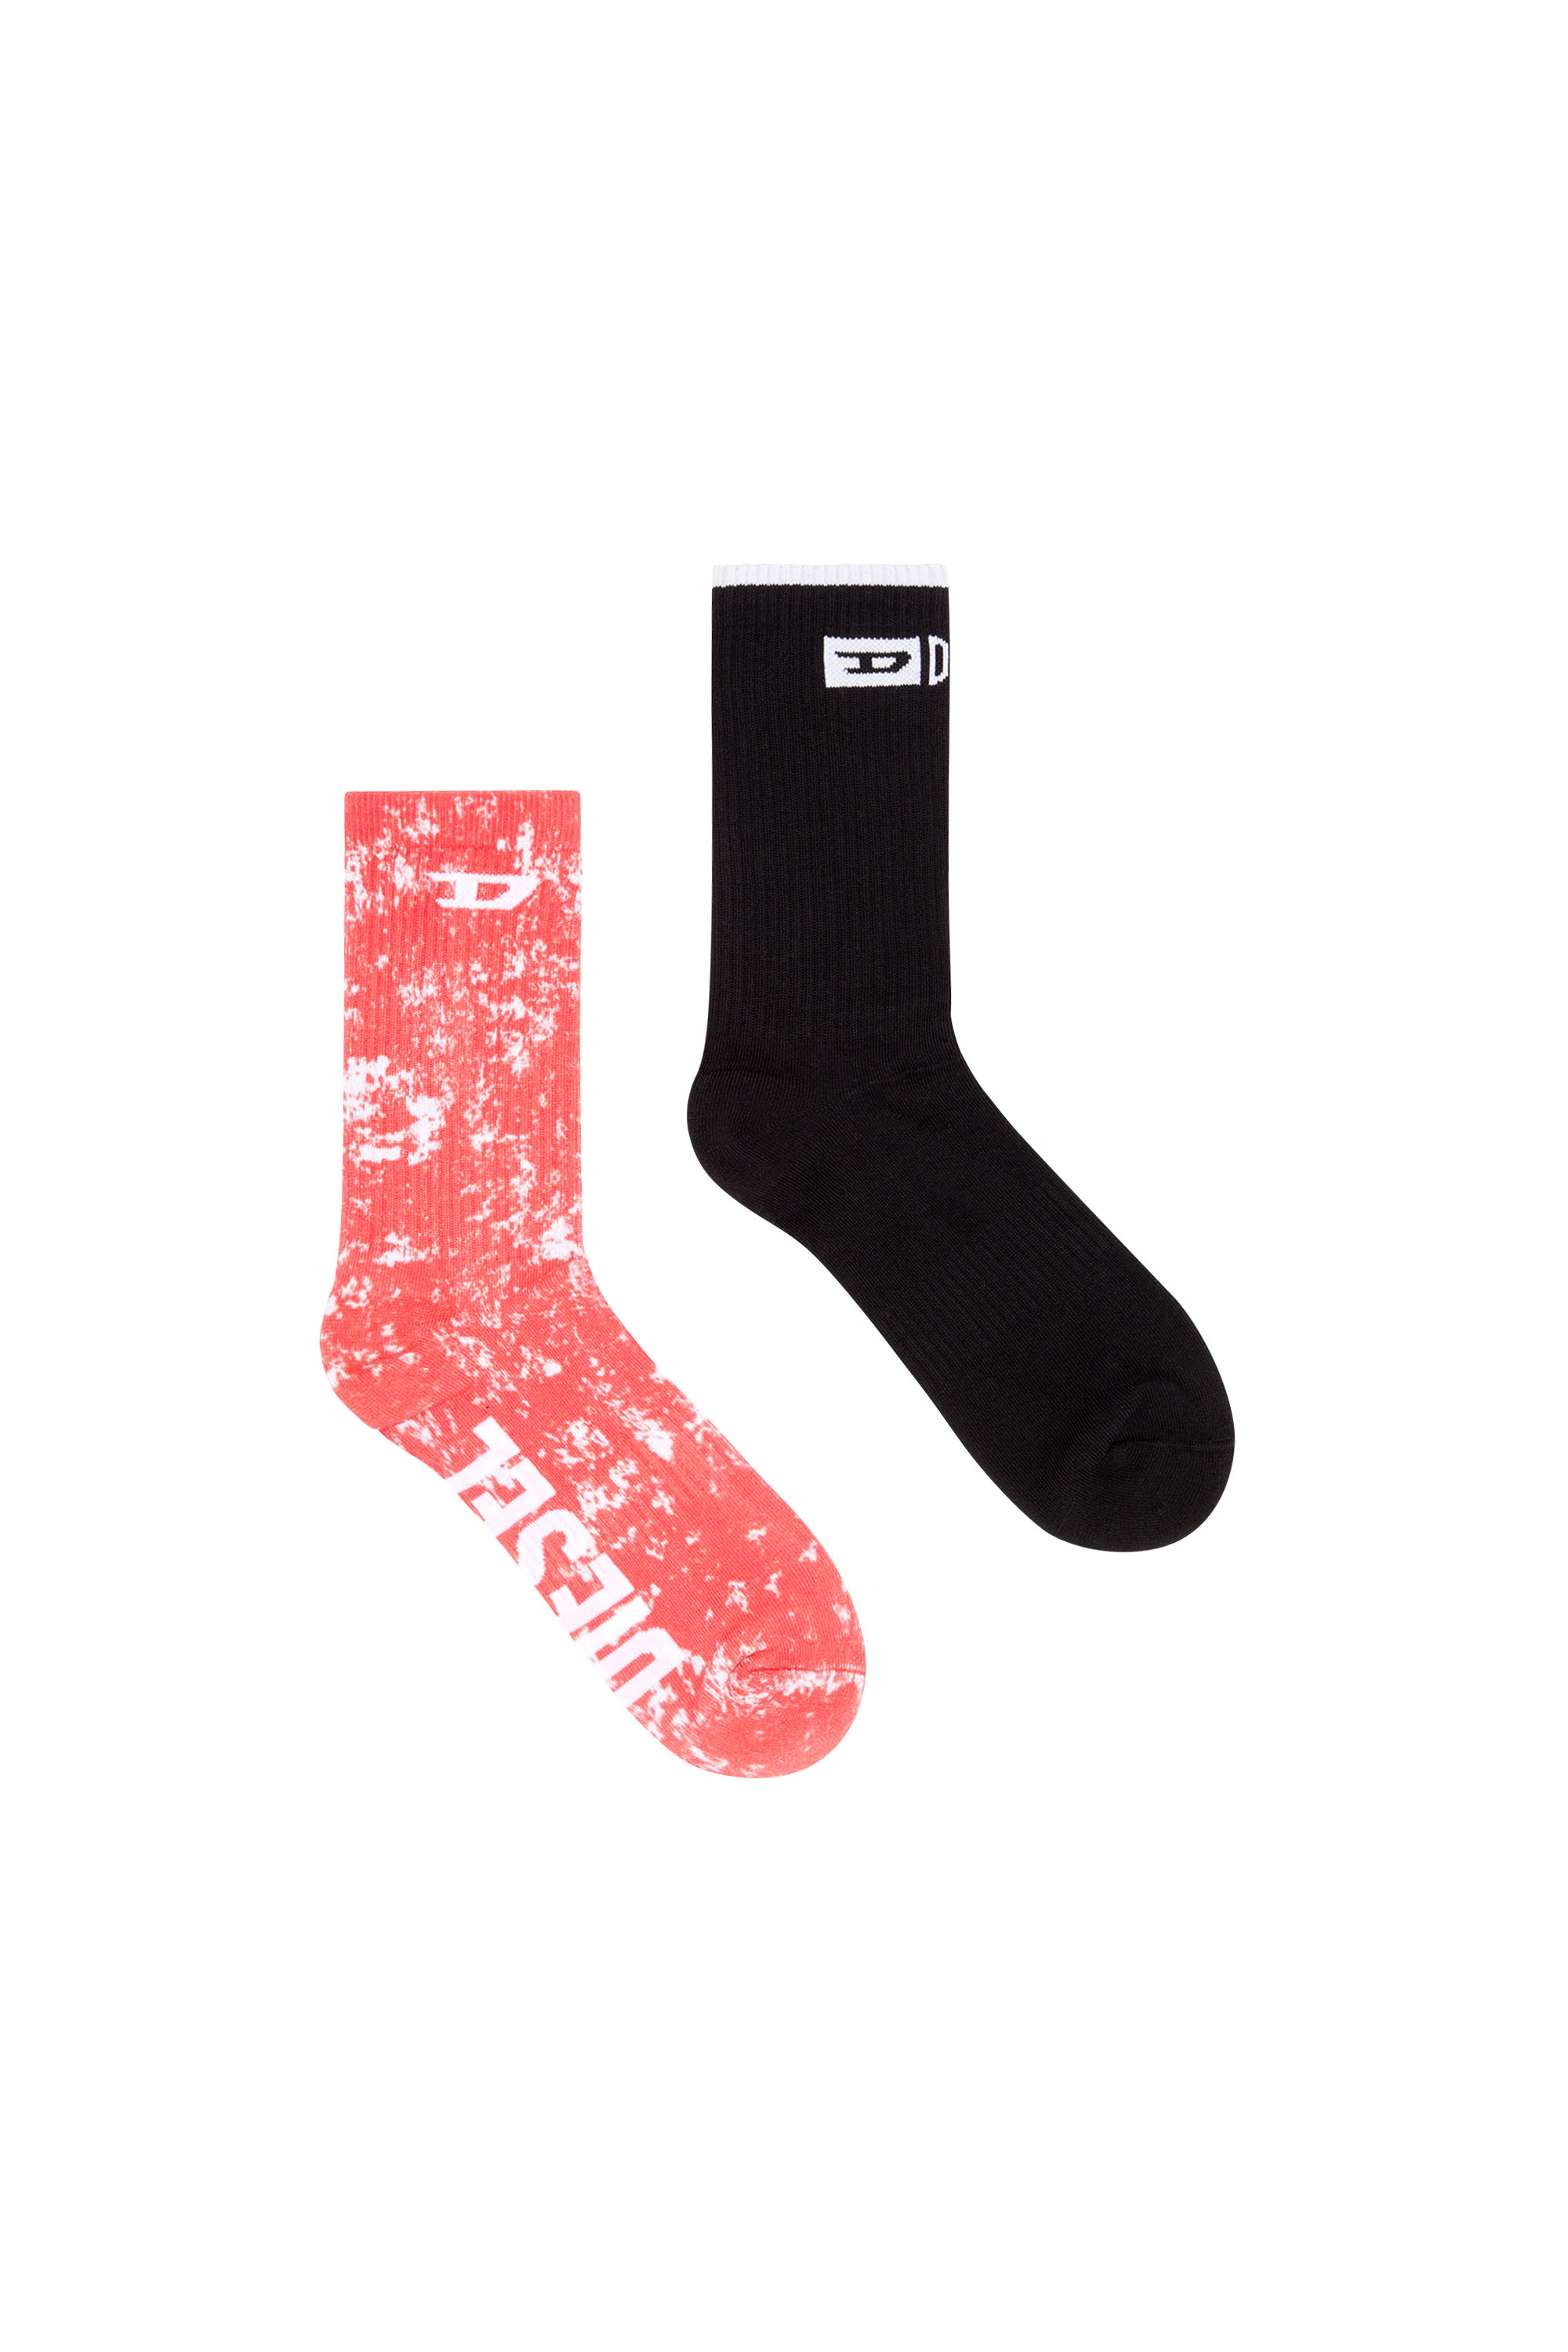 SKM-RAY-TWOPACK, Black/Red